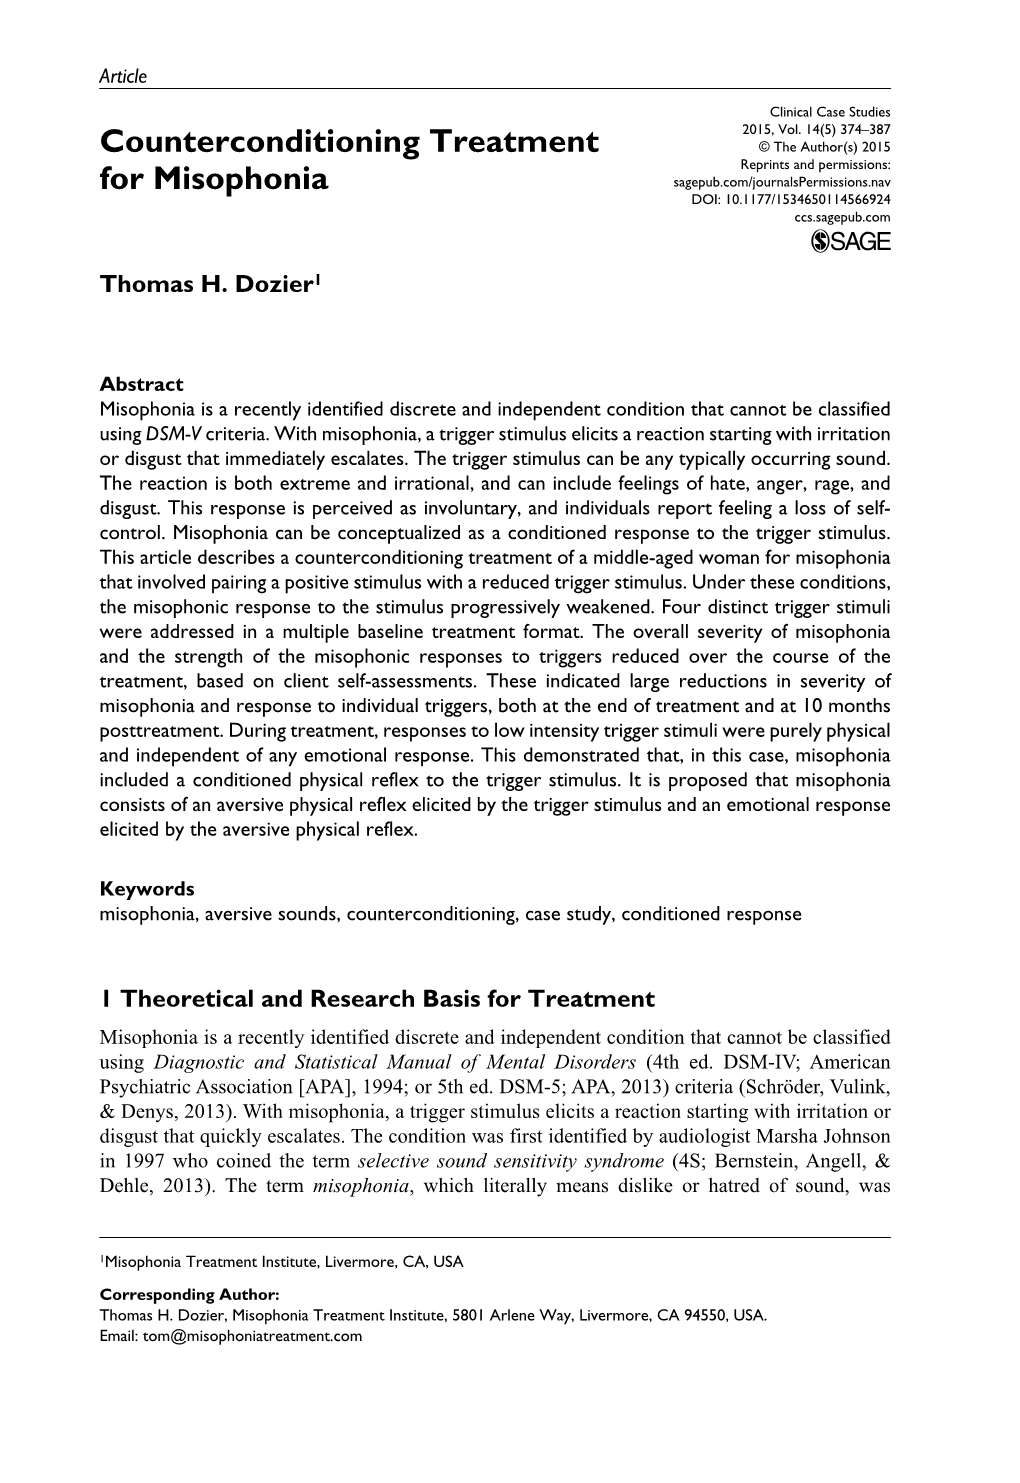 Dozier-2015-Counterconditioning-Treatment-For-Misophonia.Pdf